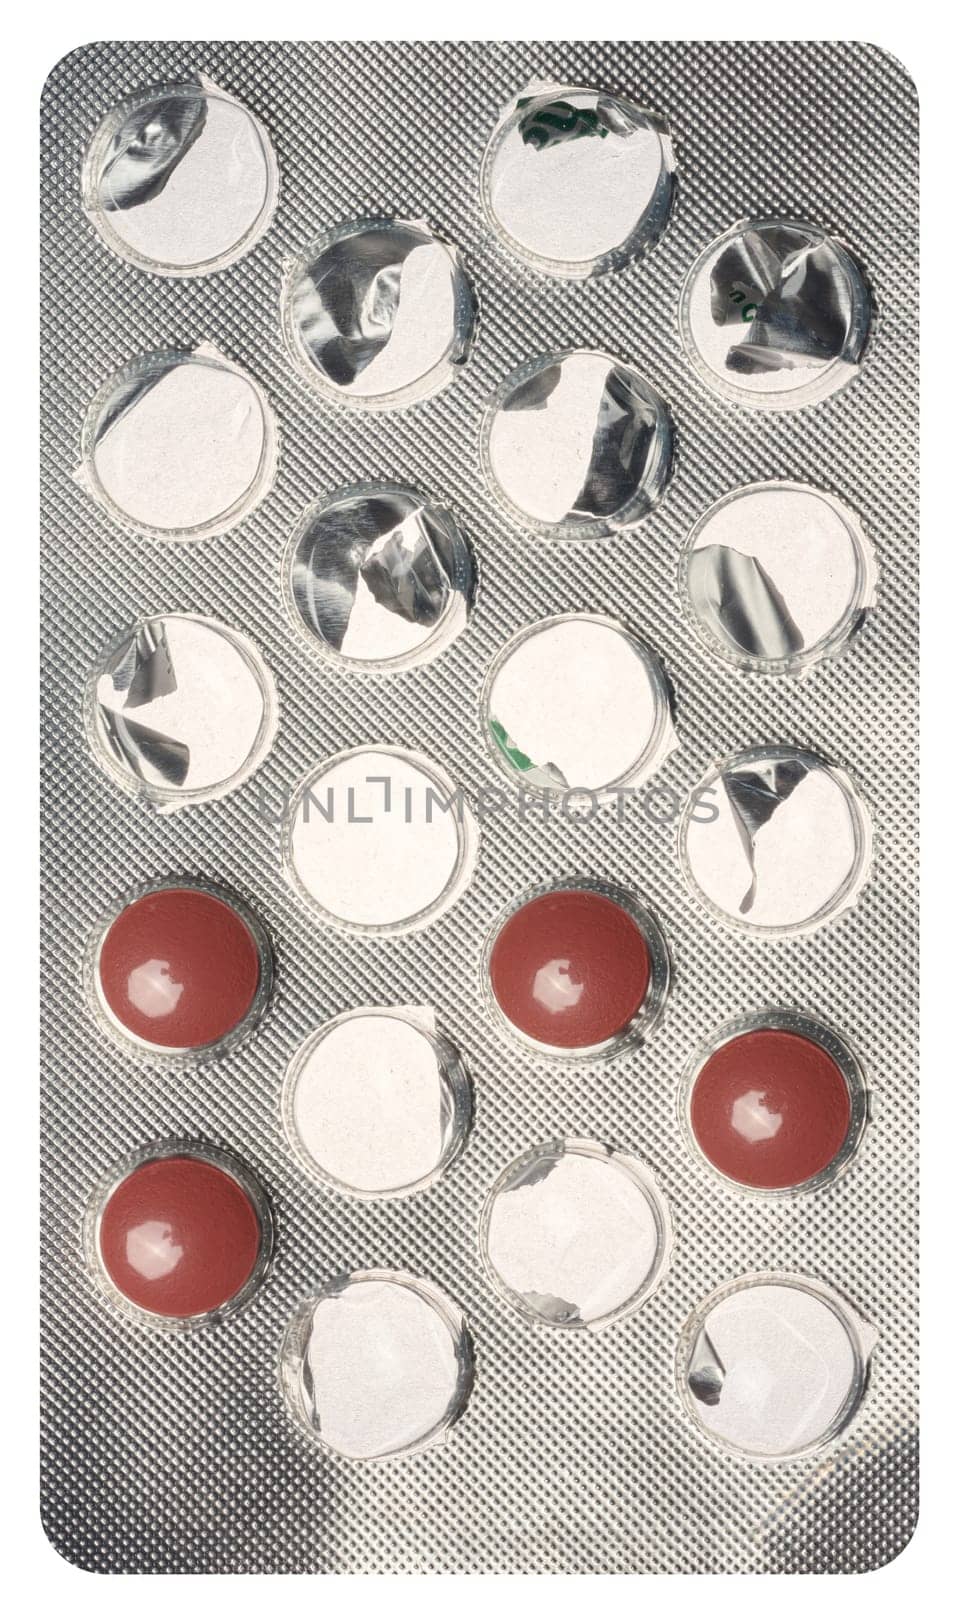 Round brown tablets in blister pack by ndanko